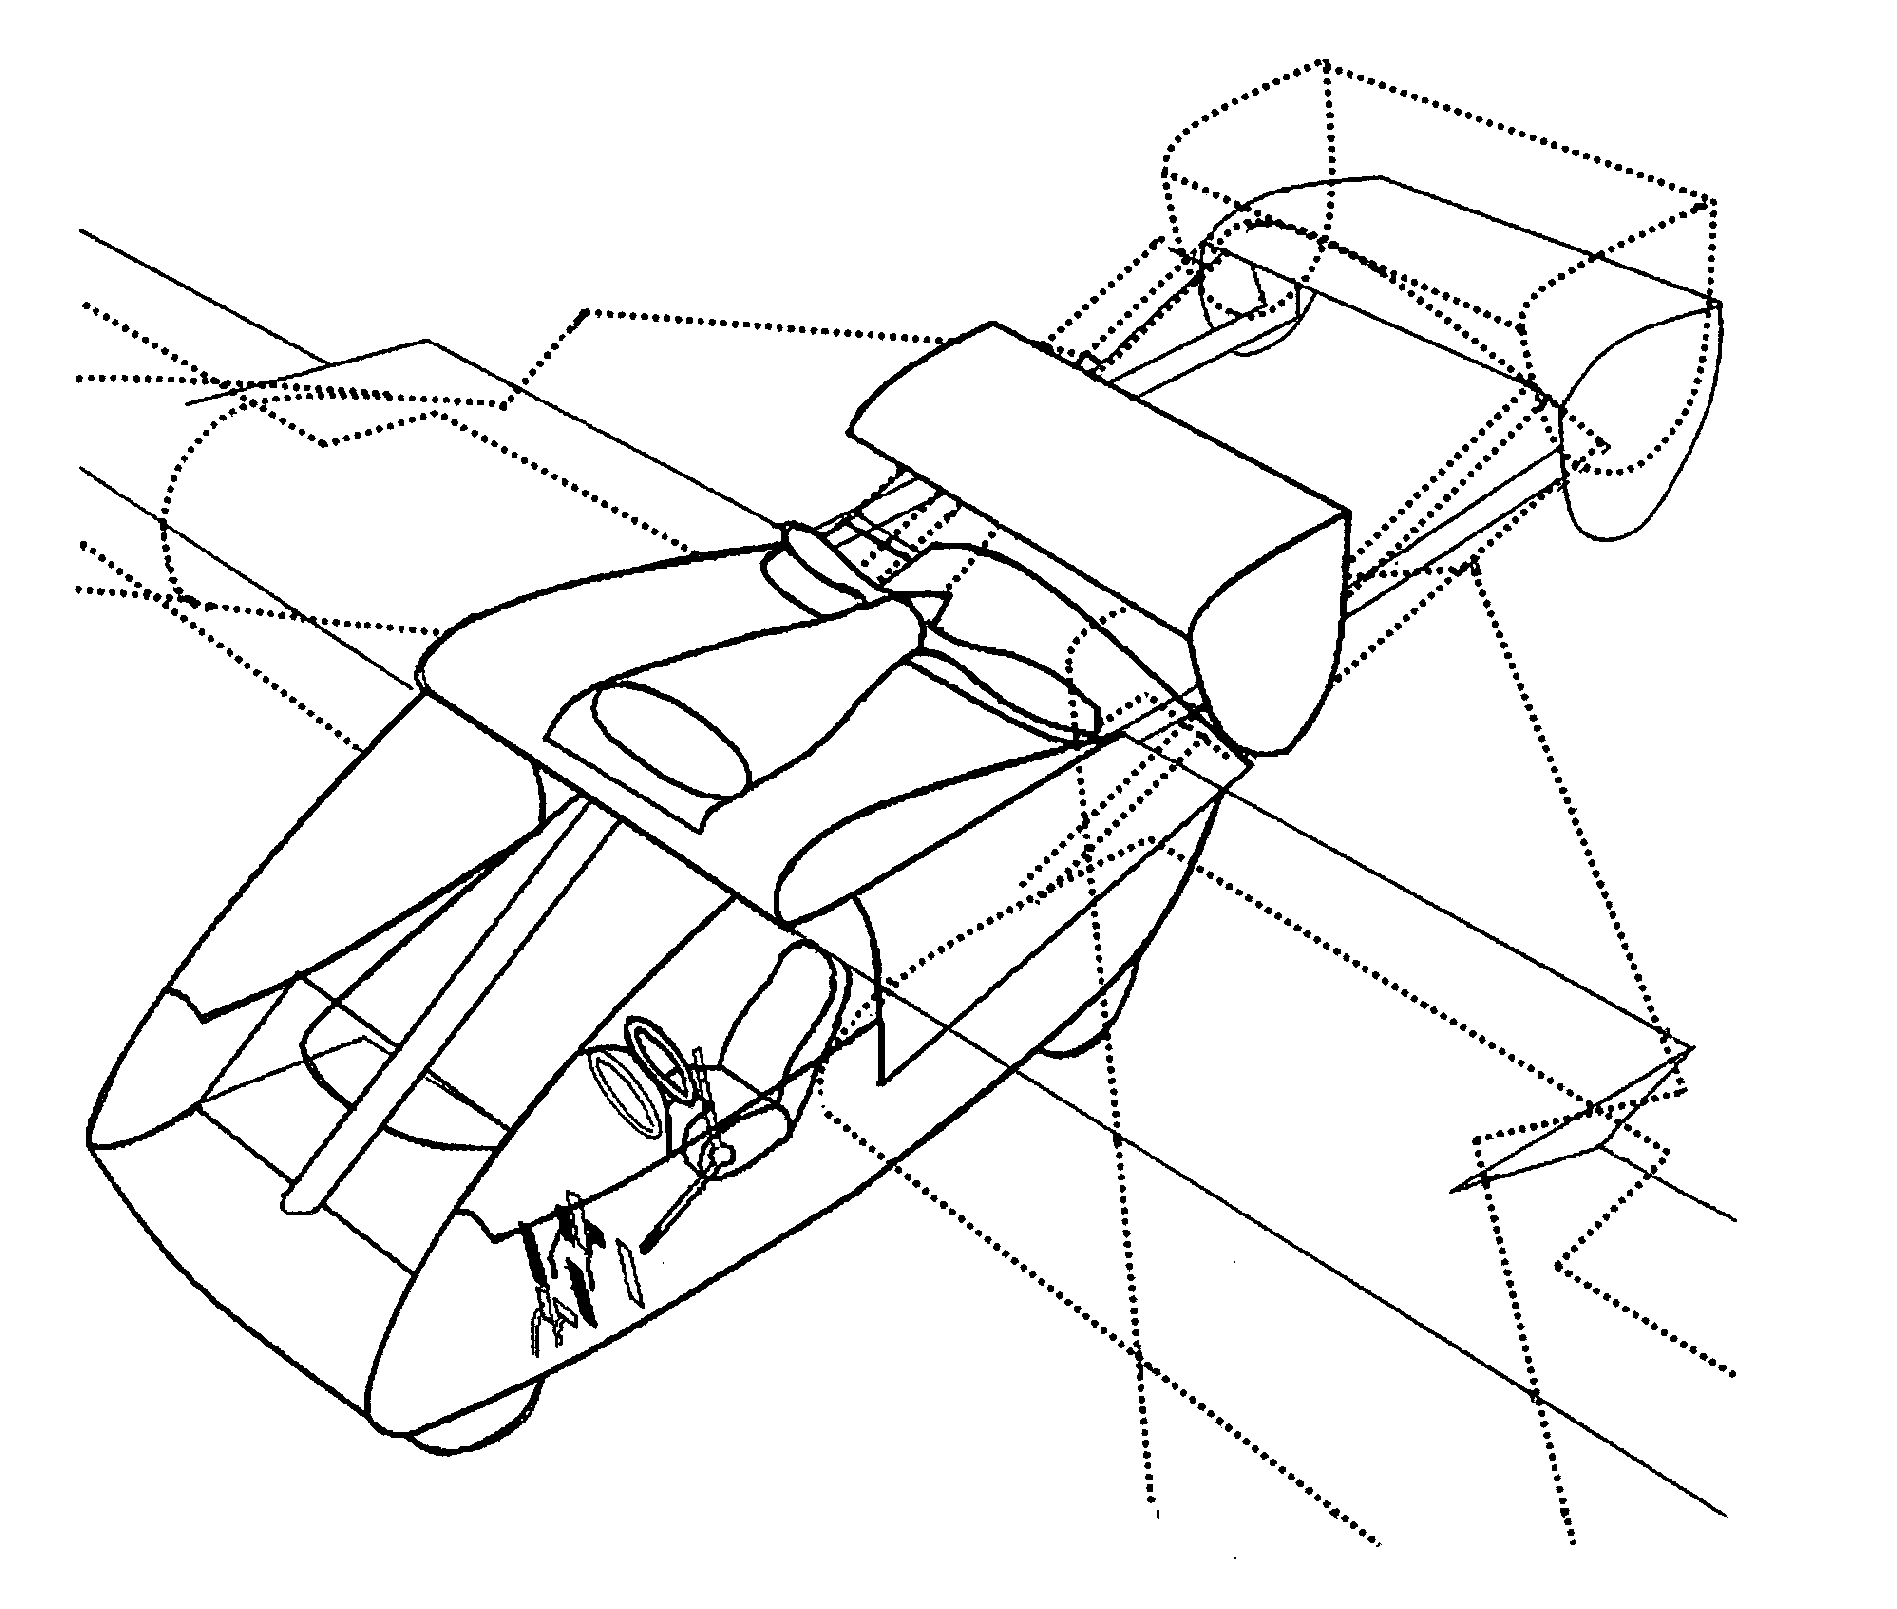 Combined air, water and road vehicle